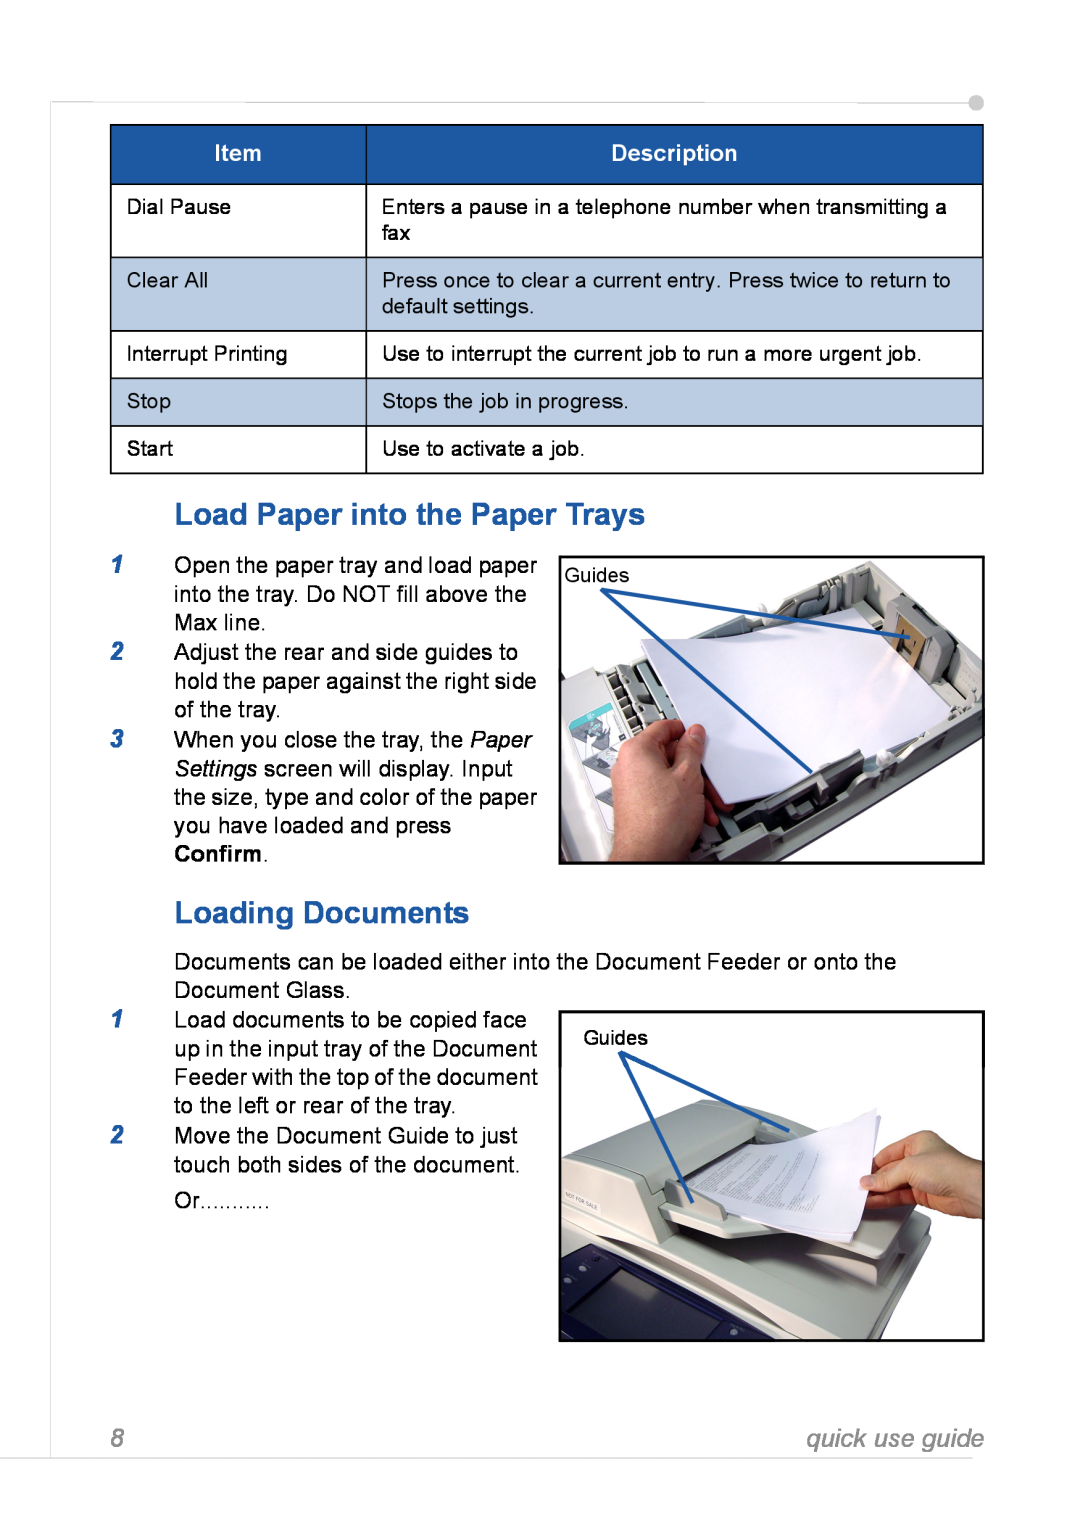 Xerox 3635MFP manual Load Paper into the Paper Trays, Loading Documents, quick use guide, Item, Description 